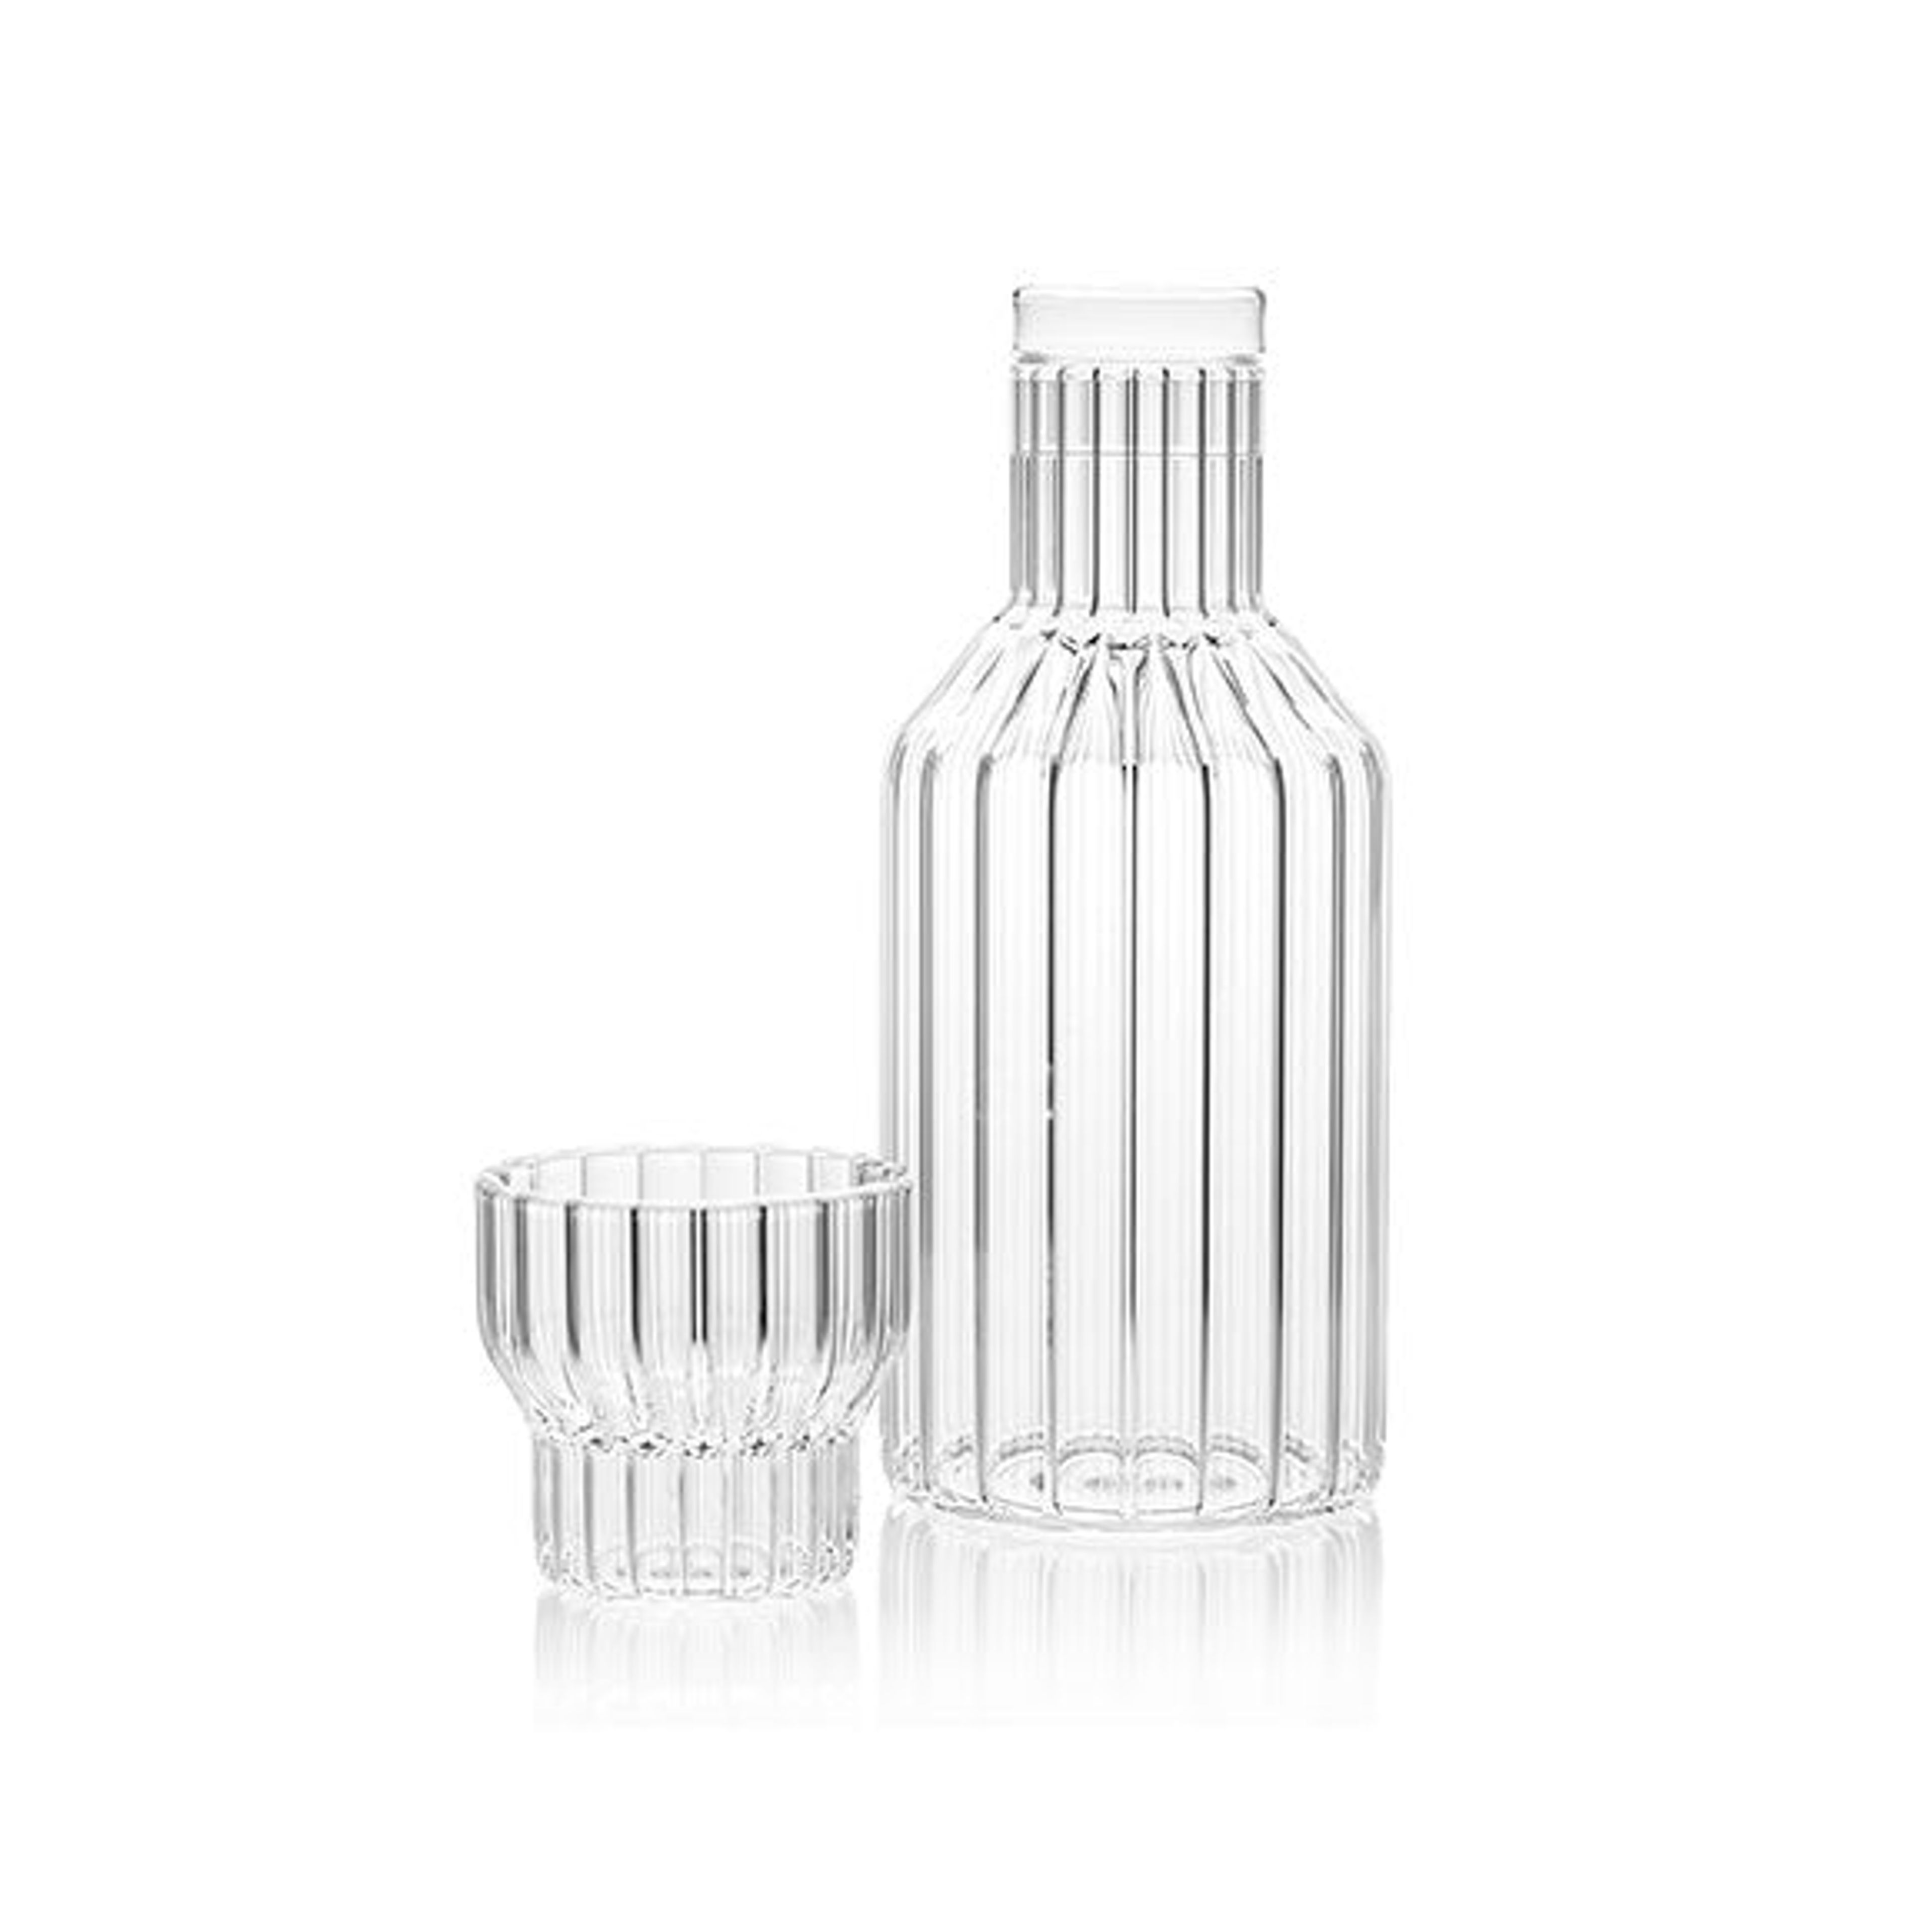 www.fferronedesign.com/products/boyd-bedside-carafe-with-small-glass